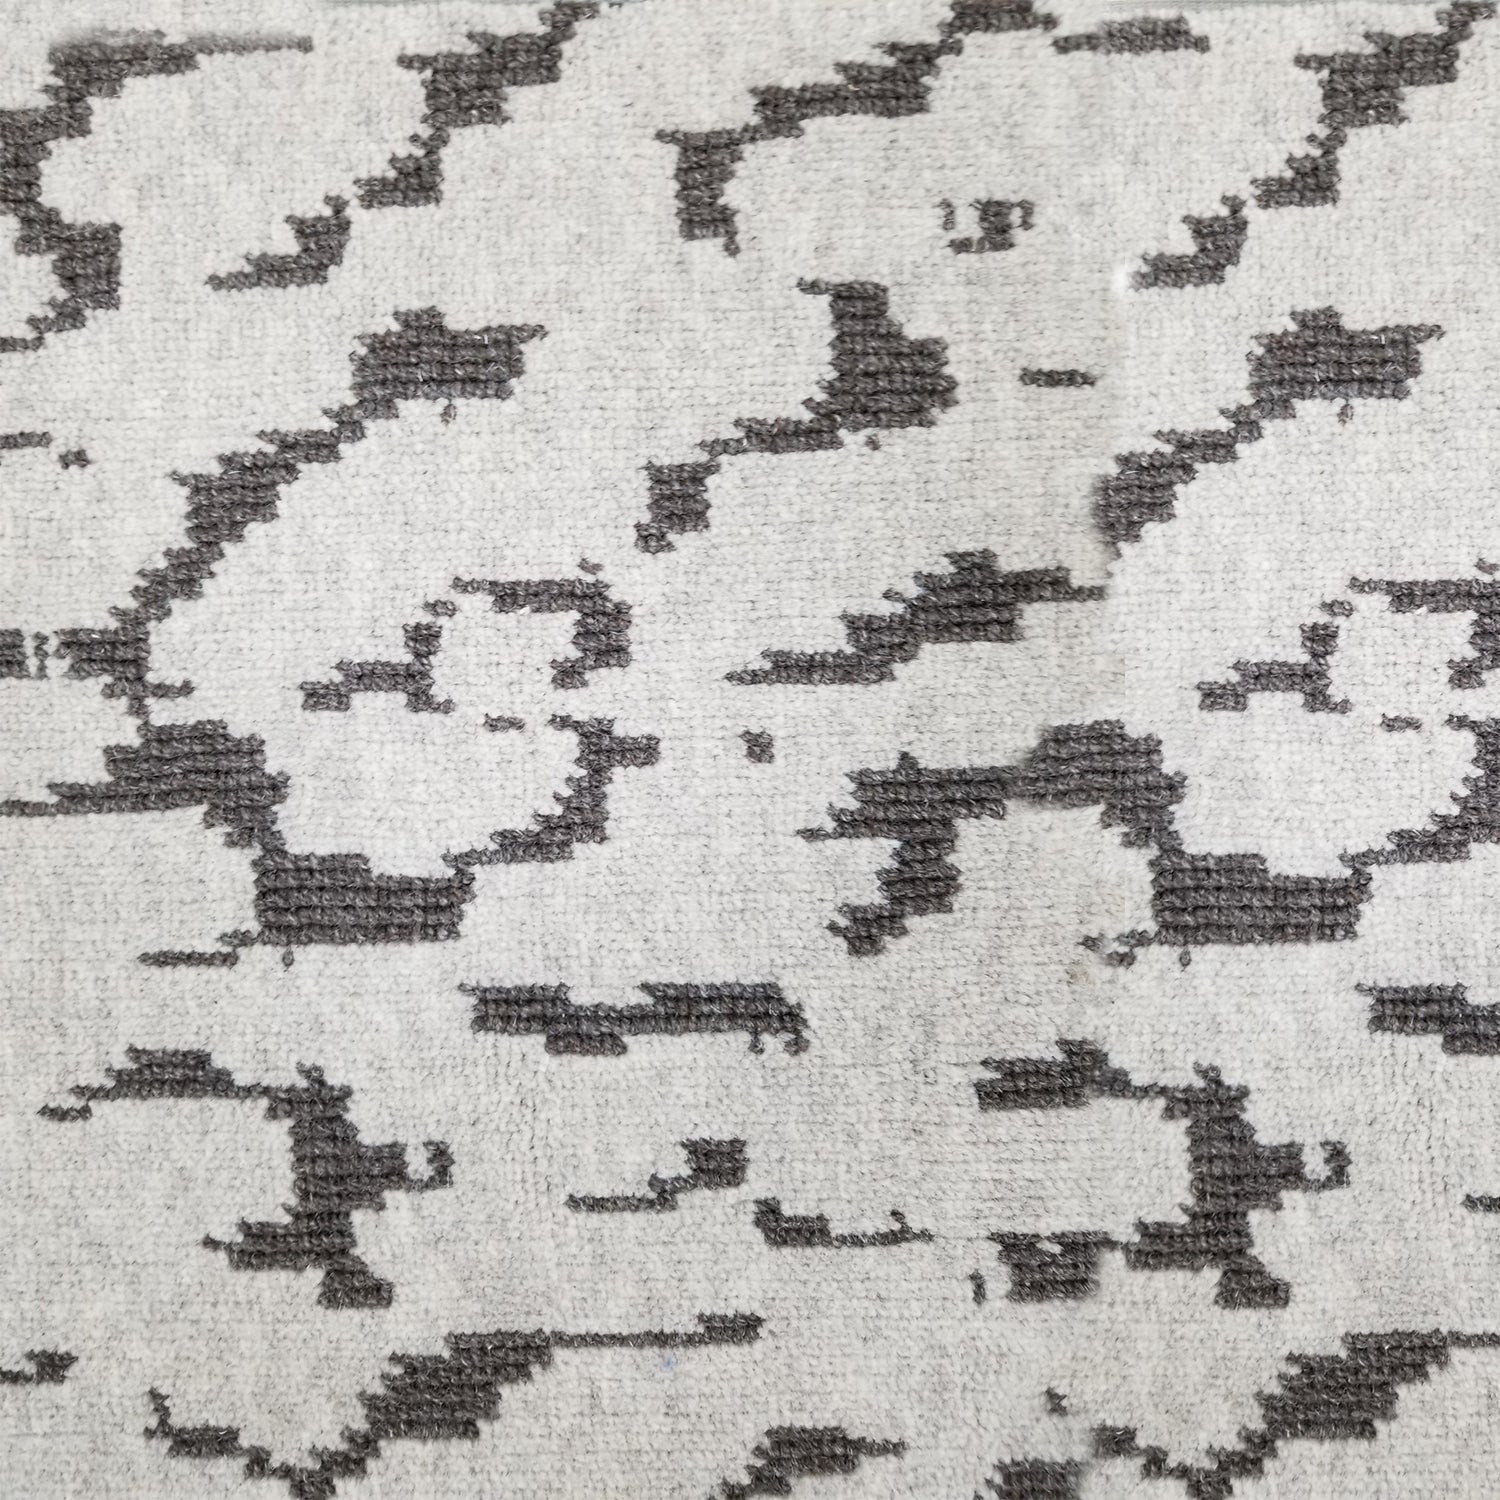 Wool broadloom carpet swatch in a woven cloud pattern in light gray with dark gray accents.